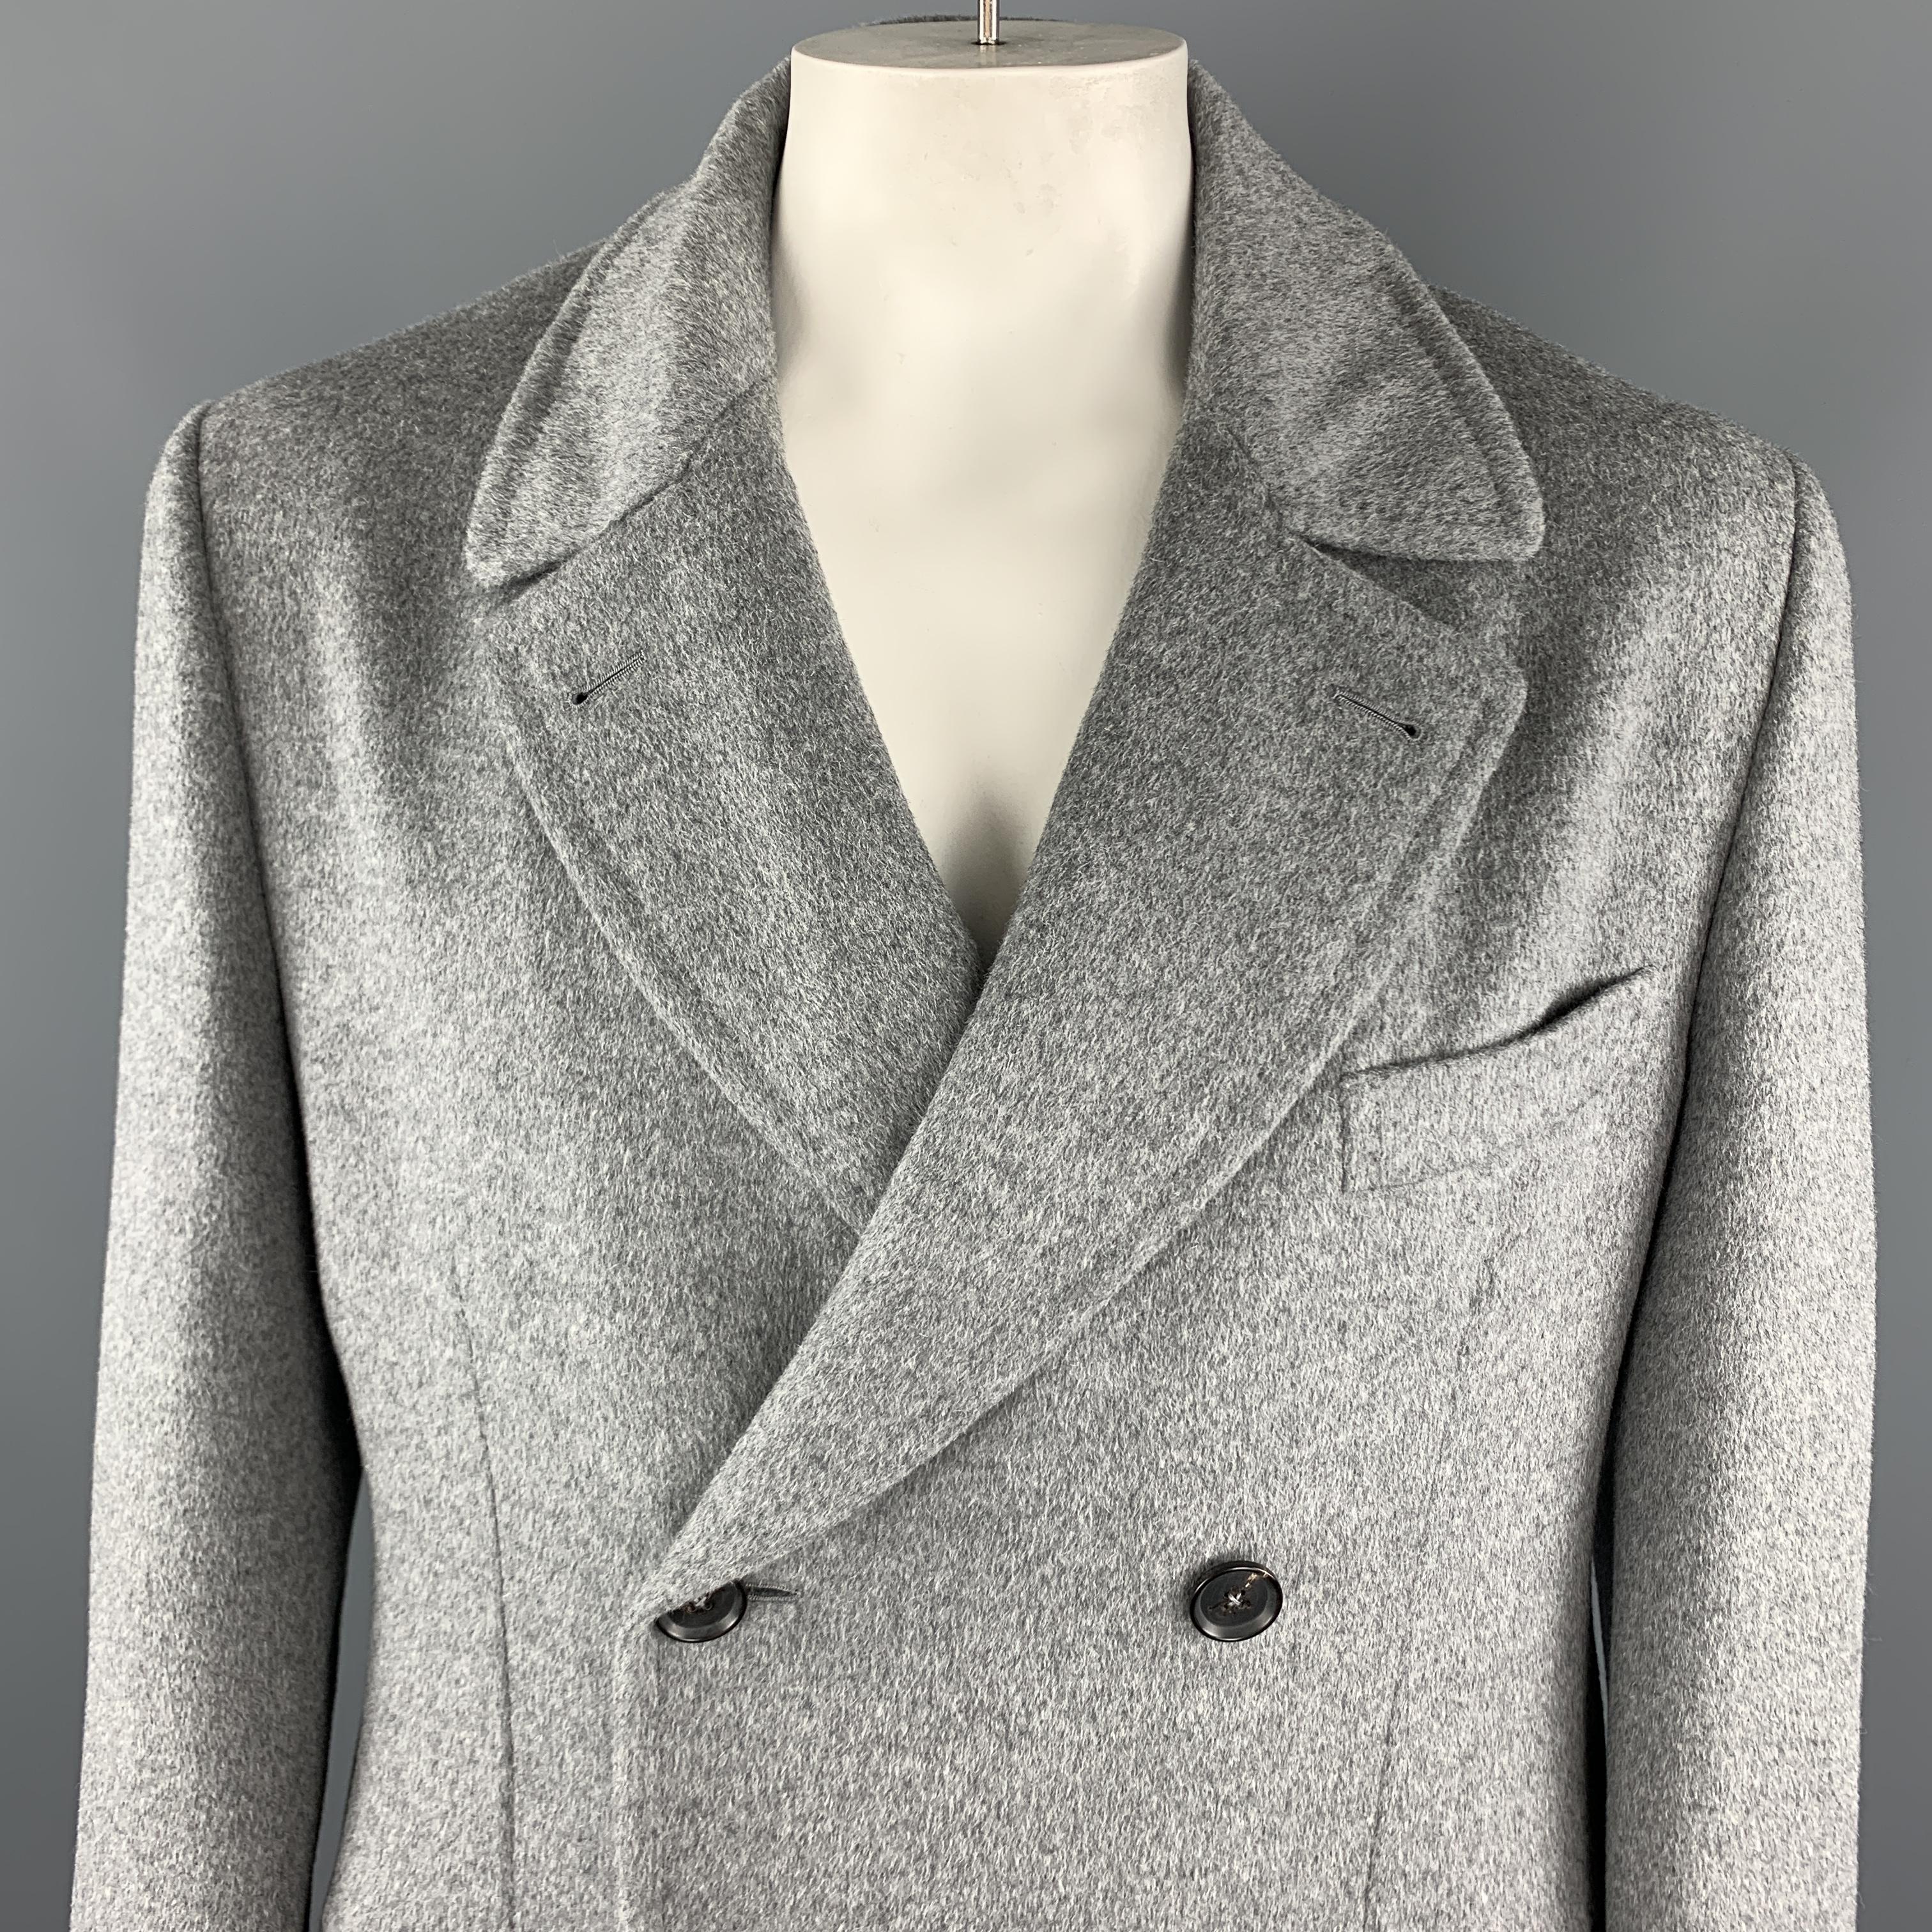 ISAIA Long Peacoat comes in a gray solid angora / wool material, double breasted, with slit and flap pockets, unbuttoned cuffs, belted back and a single vent at back. Made in Italy.

Excellent Pre-Owned Condition.
Marked: IT